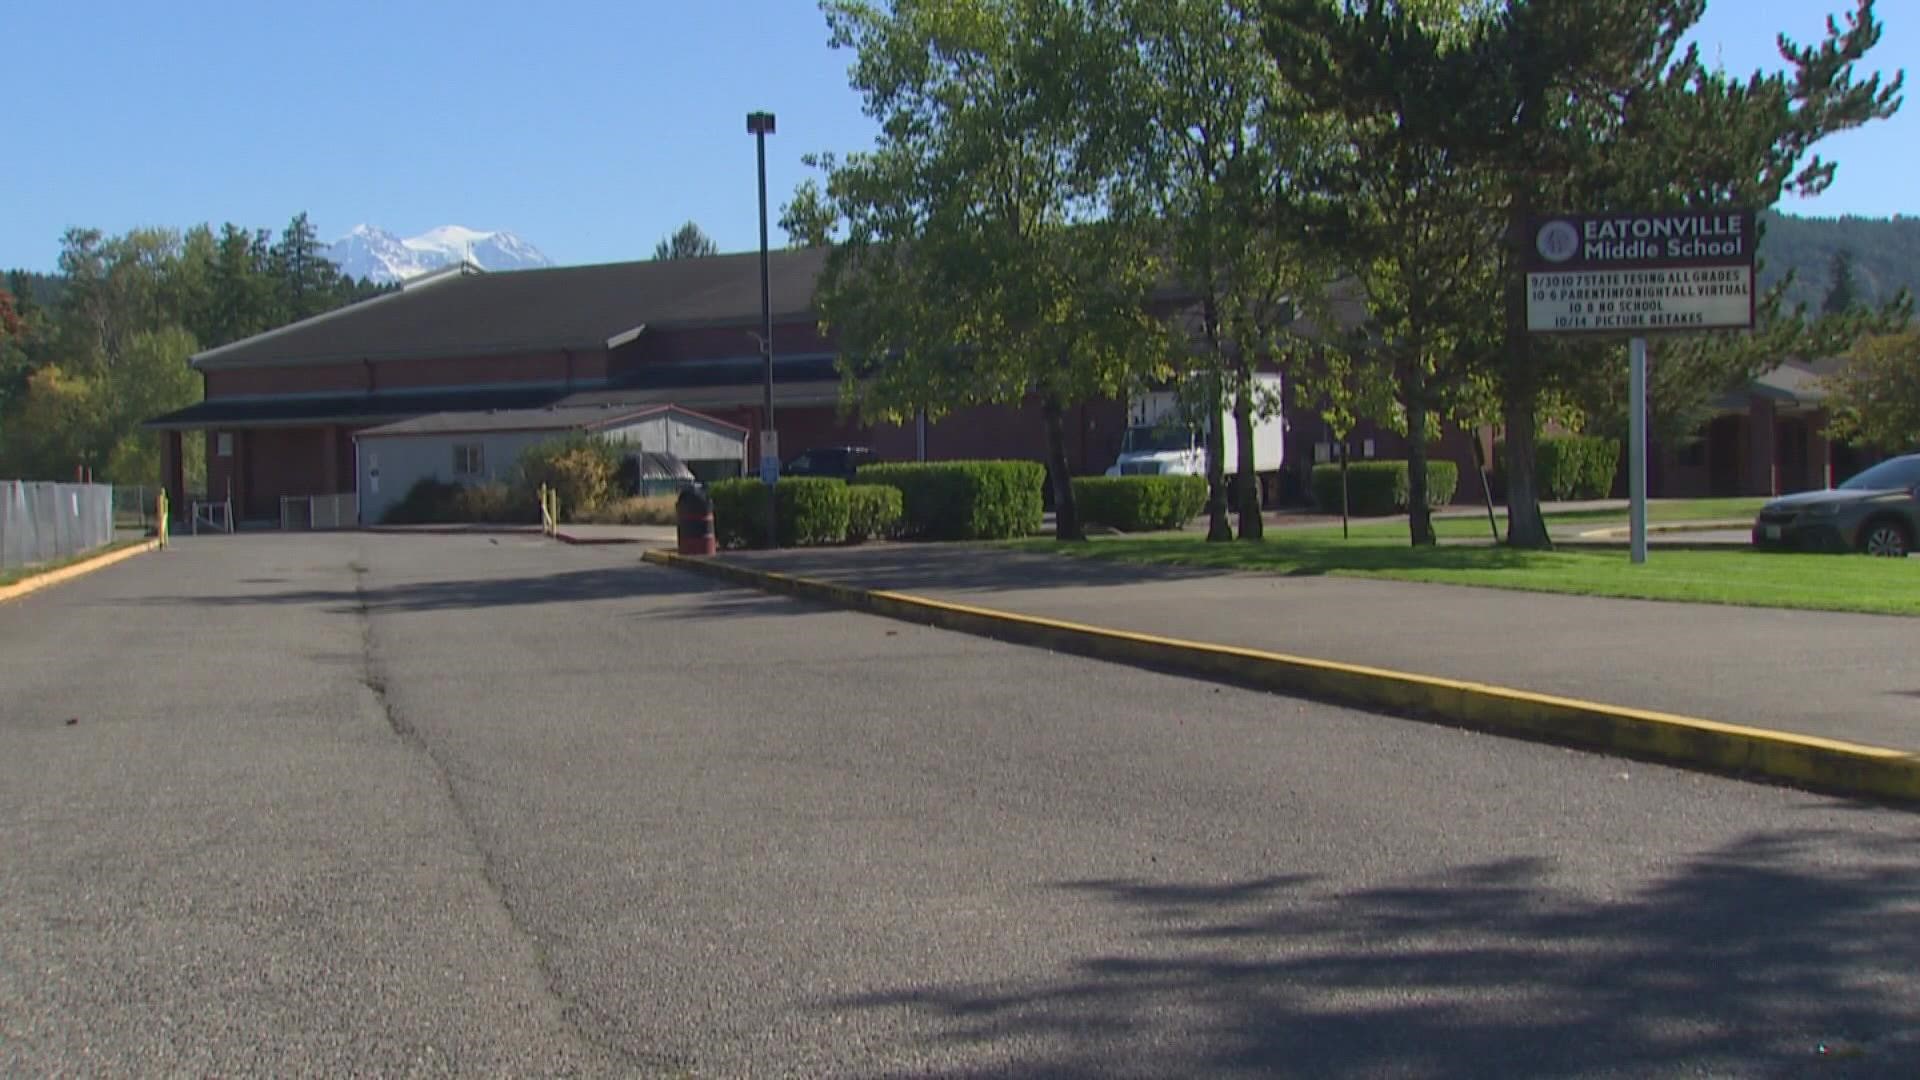 Unvaccinated employees are still working in Eatonville schools after the district failed to terminate employees in violation of the governor's vaccine mandate.